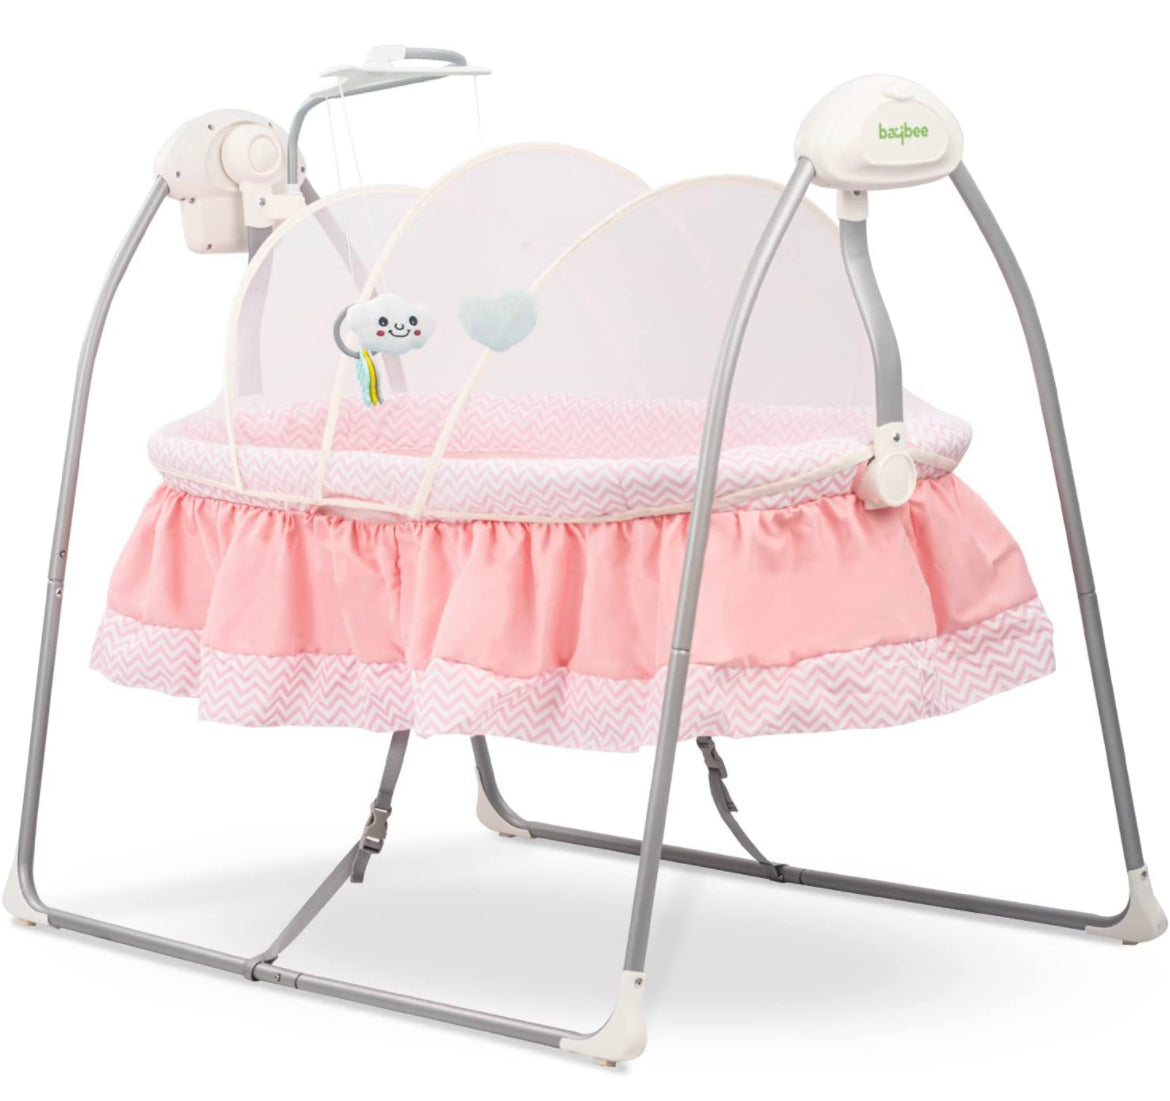 Wanda AutomaticElectric Baby Swing Cradle with Mosquito Net, Remote, Toy Bar & Music 0-24 Months (Pink) - The Minikin Store